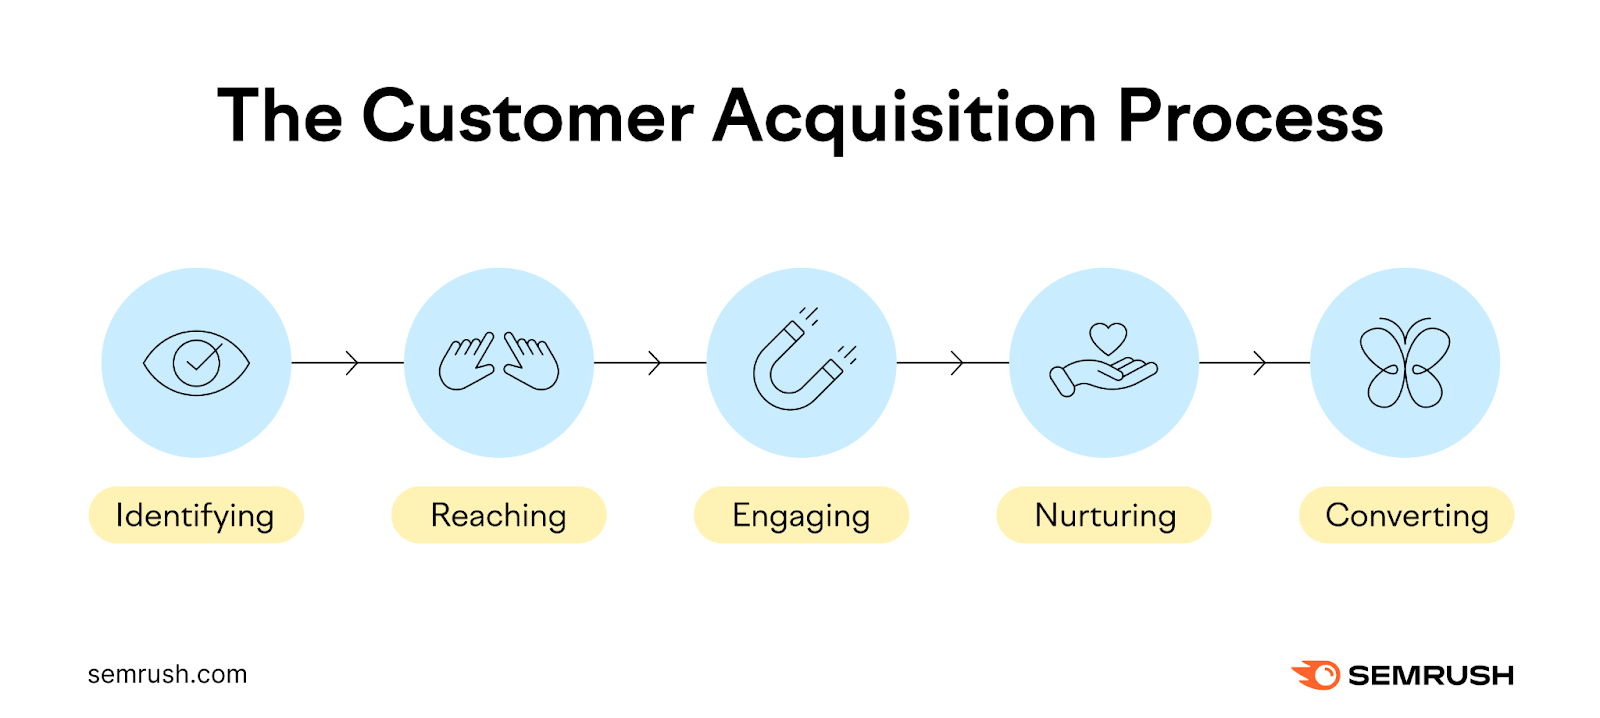 The lawsuit    acquisition process   is identifying, reaching, engaging, nurturing, and converting.